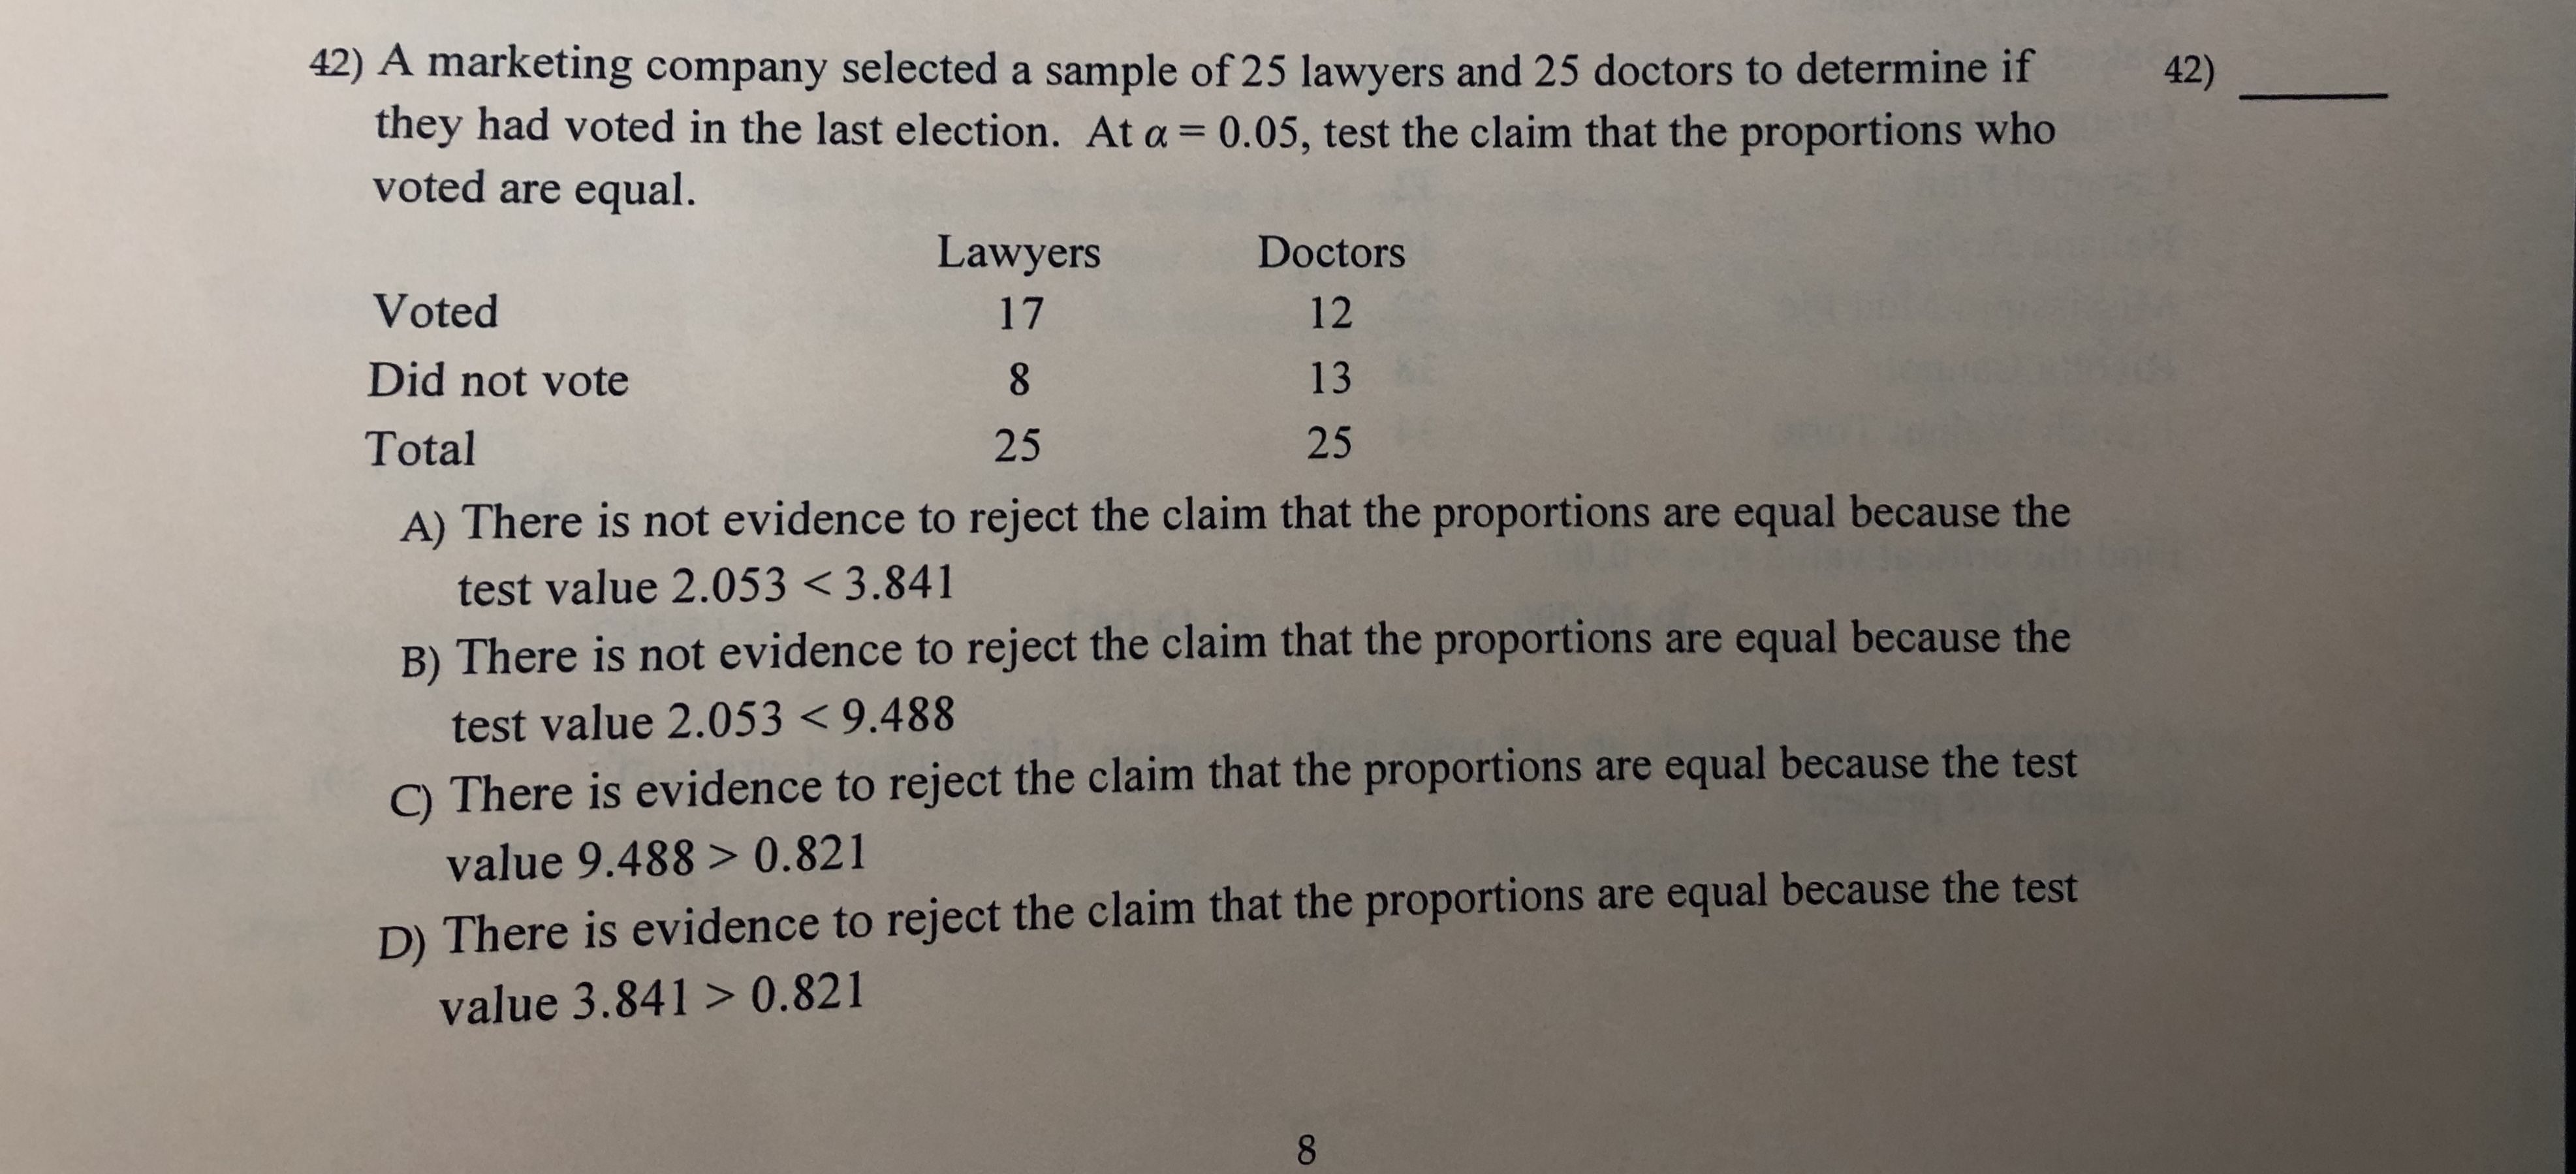 42) A marketing company selected a sample of 25 lawyers and 25 doctors to determine if
they had voted in the last election. At a 0.05, test the claim that the proportions who
voted are equal.
42)
Lawyers
Doctors
Voted
17
12
13
Did not vote
8
25
25
Total
A) There is not evidence to reject the claim that the proportions are equal because the
test value 2.053 < 3.841
B) There is not evidence to reject the claim that the proportions are equal because the
test value 2.053 < 9.488
) There is evidence to reject the claim that the proportions are equal because the test
value 9.488 > 0.821
D) There is evidence to reject the claim that the proportions are equal because the test
value 3.841 > 0.821
